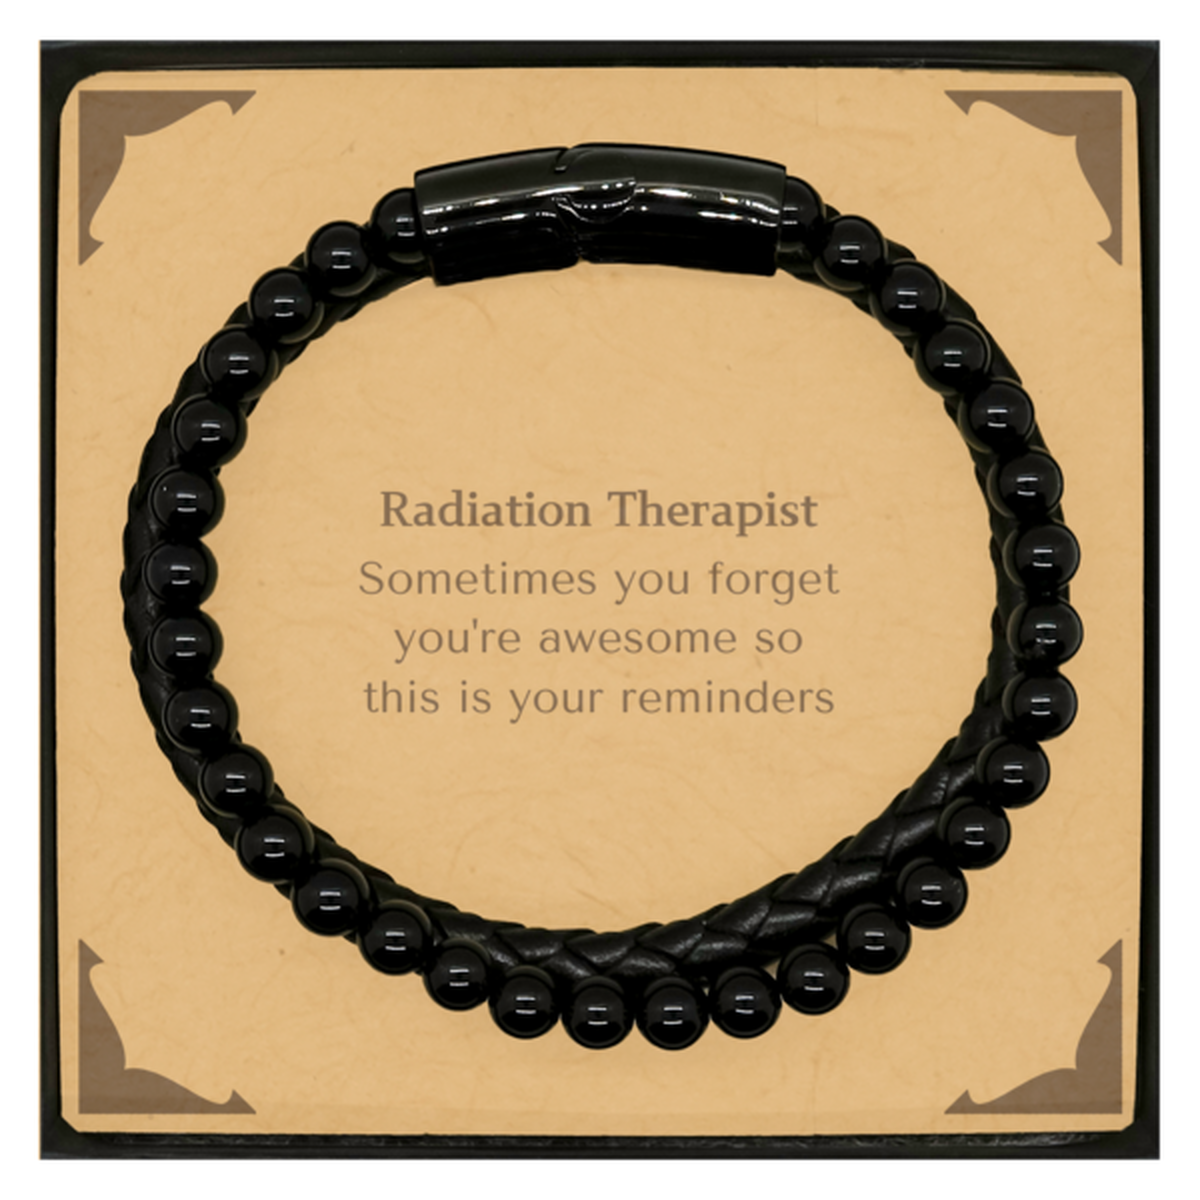 Sentimental Radiation Therapist Stone Leather Bracelets, Radiation Therapist Sometimes you forget you're awesome so this is your reminders, Graduation Christmas Birthday Gifts for Radiation Therapist, Men, Women, Coworkers